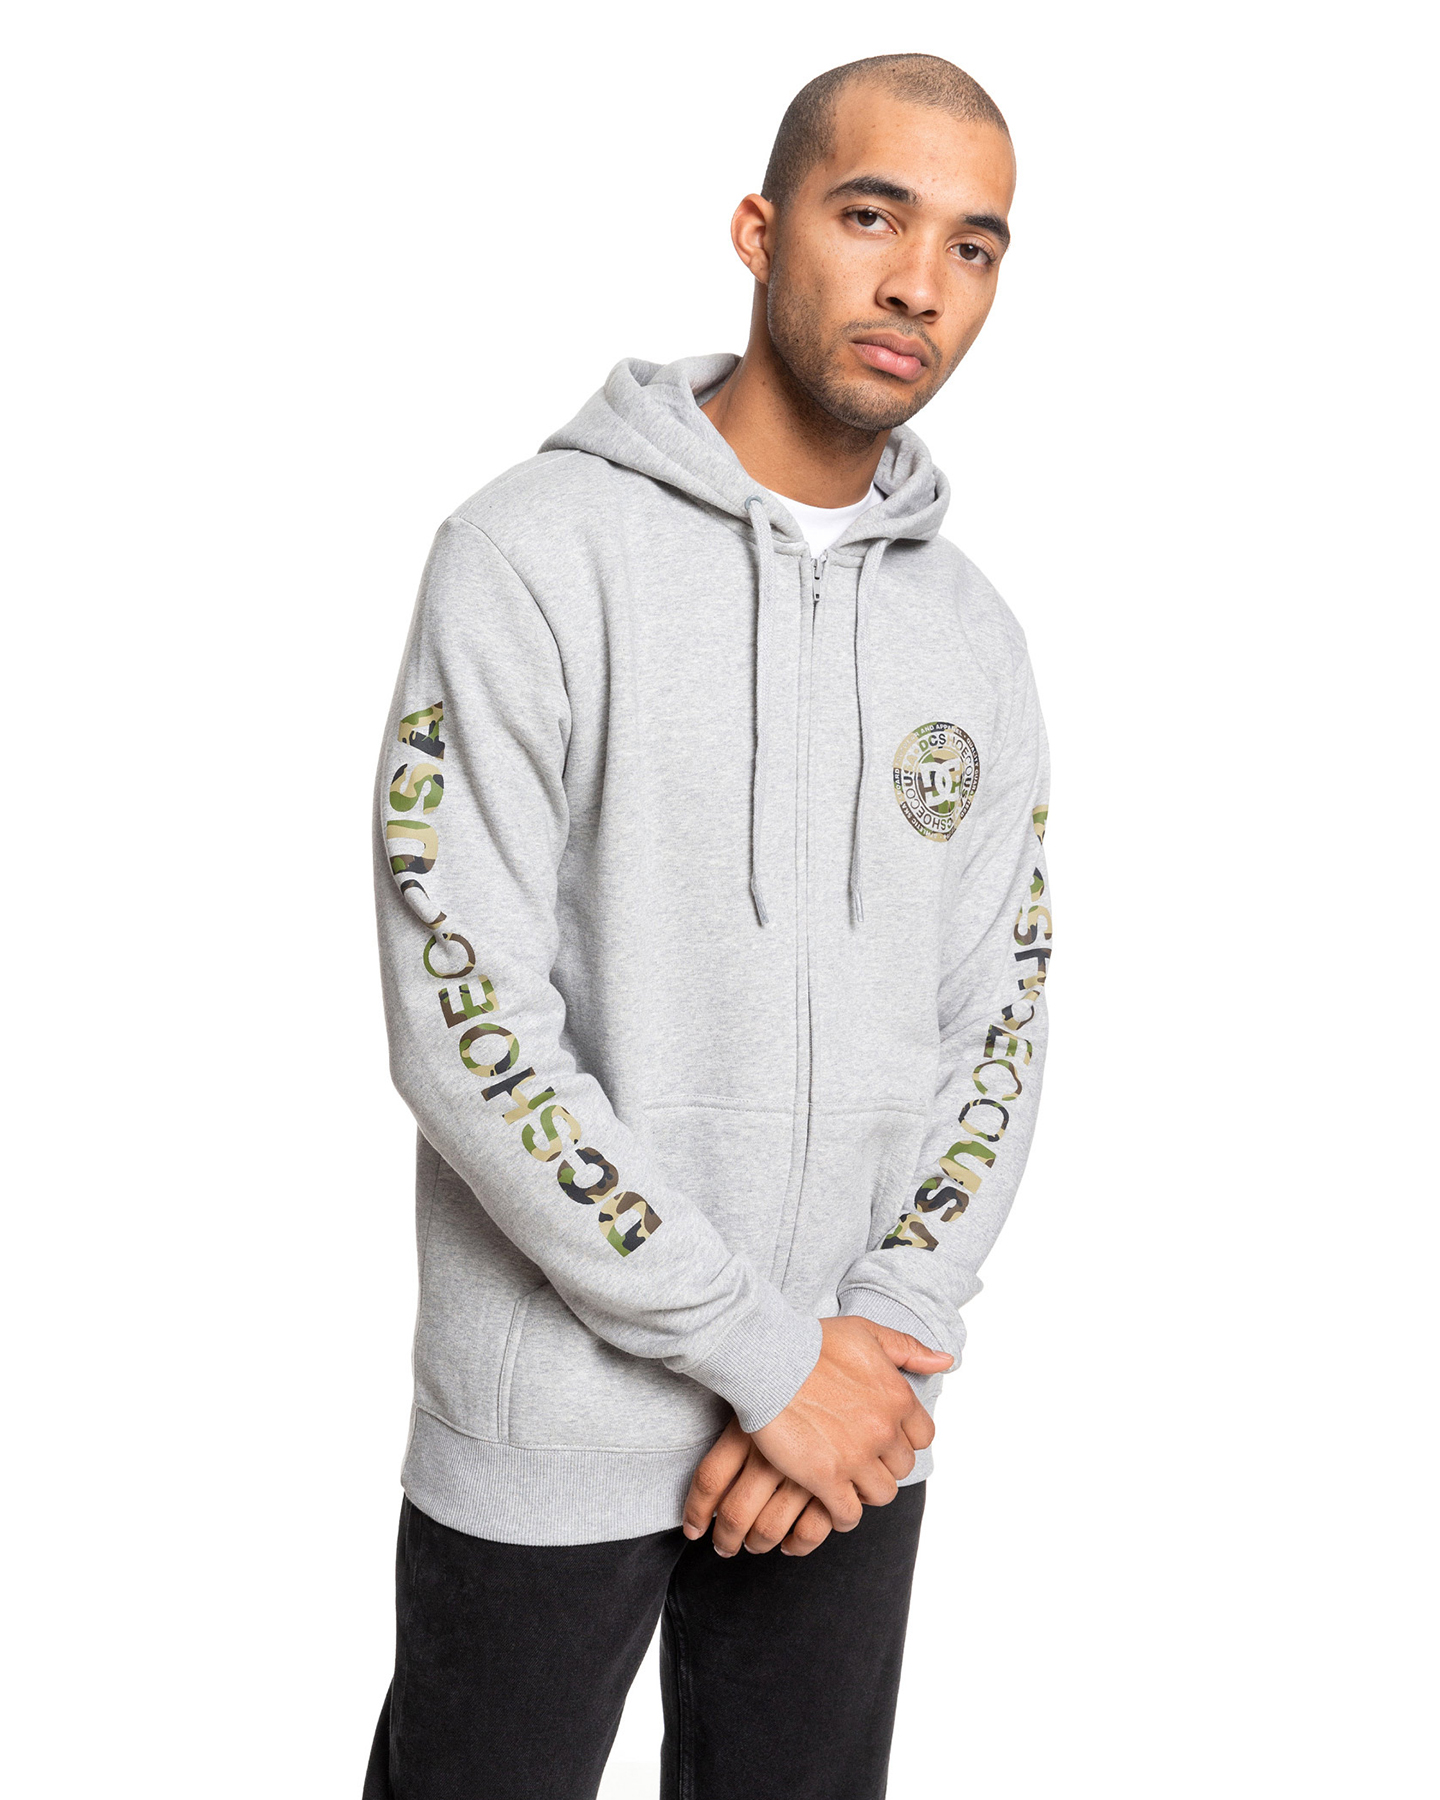 Dc Shoes Mens Circle Star Zip Up Hoodie - Grey Heather/Camo | SurfStitch